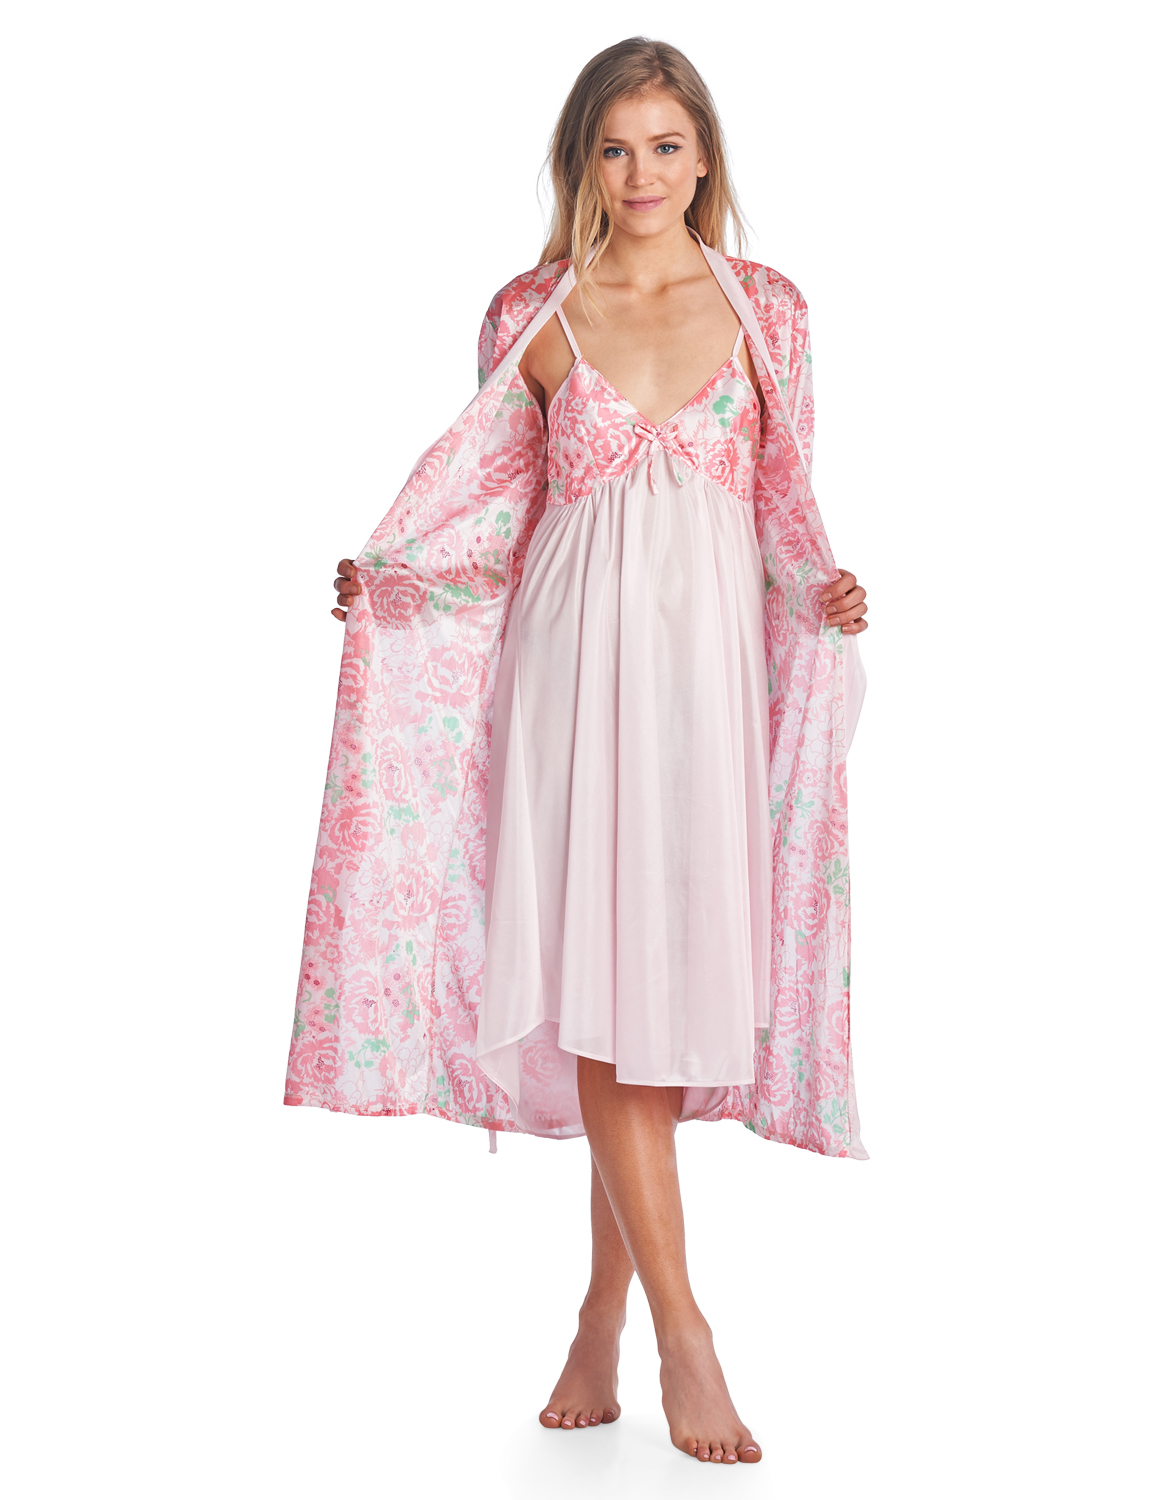 Casual Nights Womens Satin 2 Piece Robe And Nightgown Set Pink La415pk